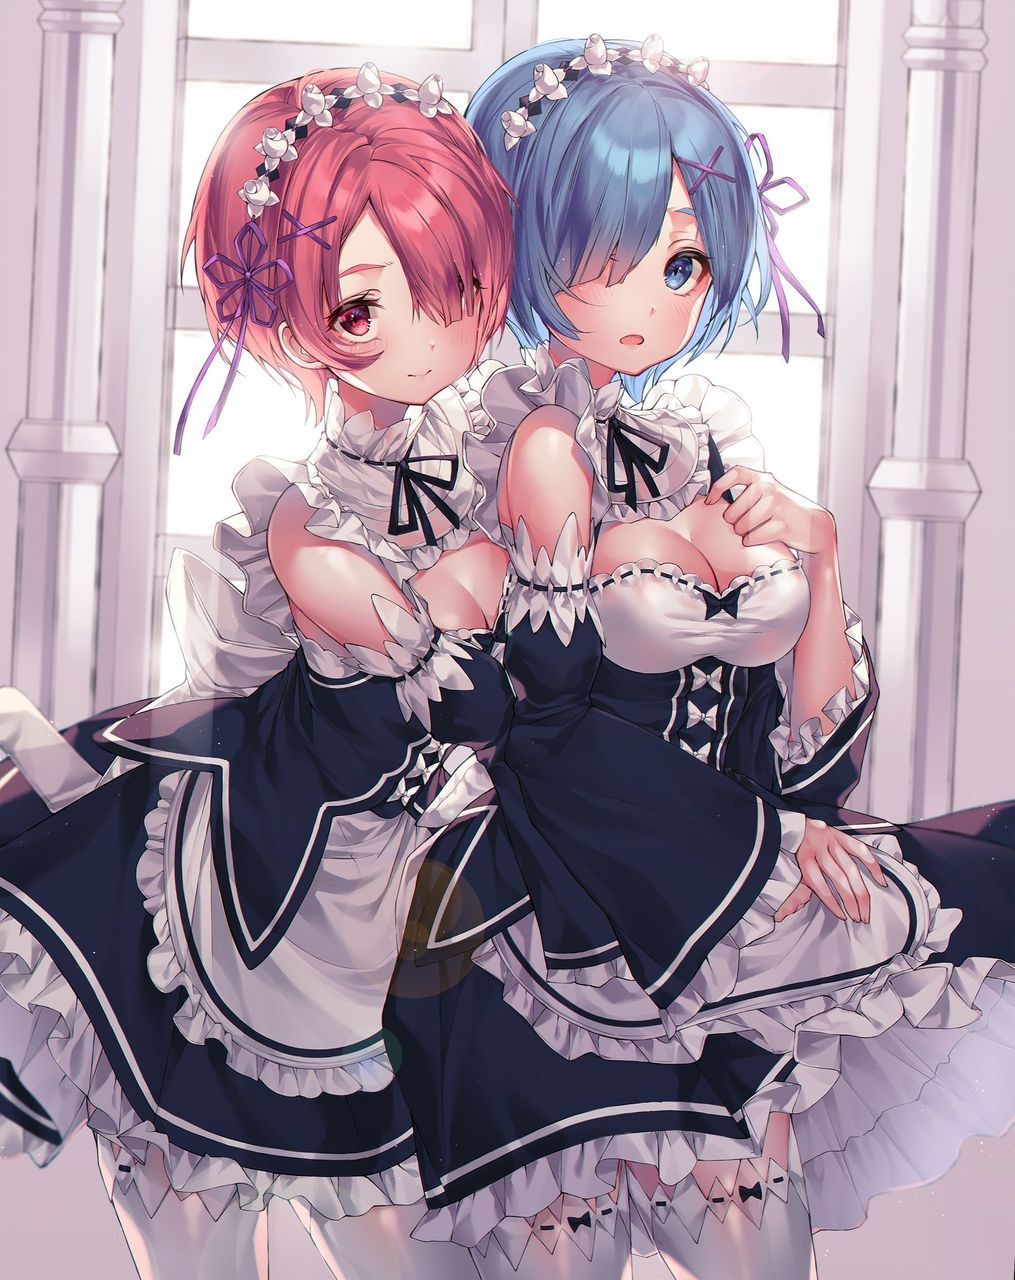 【Maid】If you get rich, you can put an image of a maid you want to hire Part 12 8